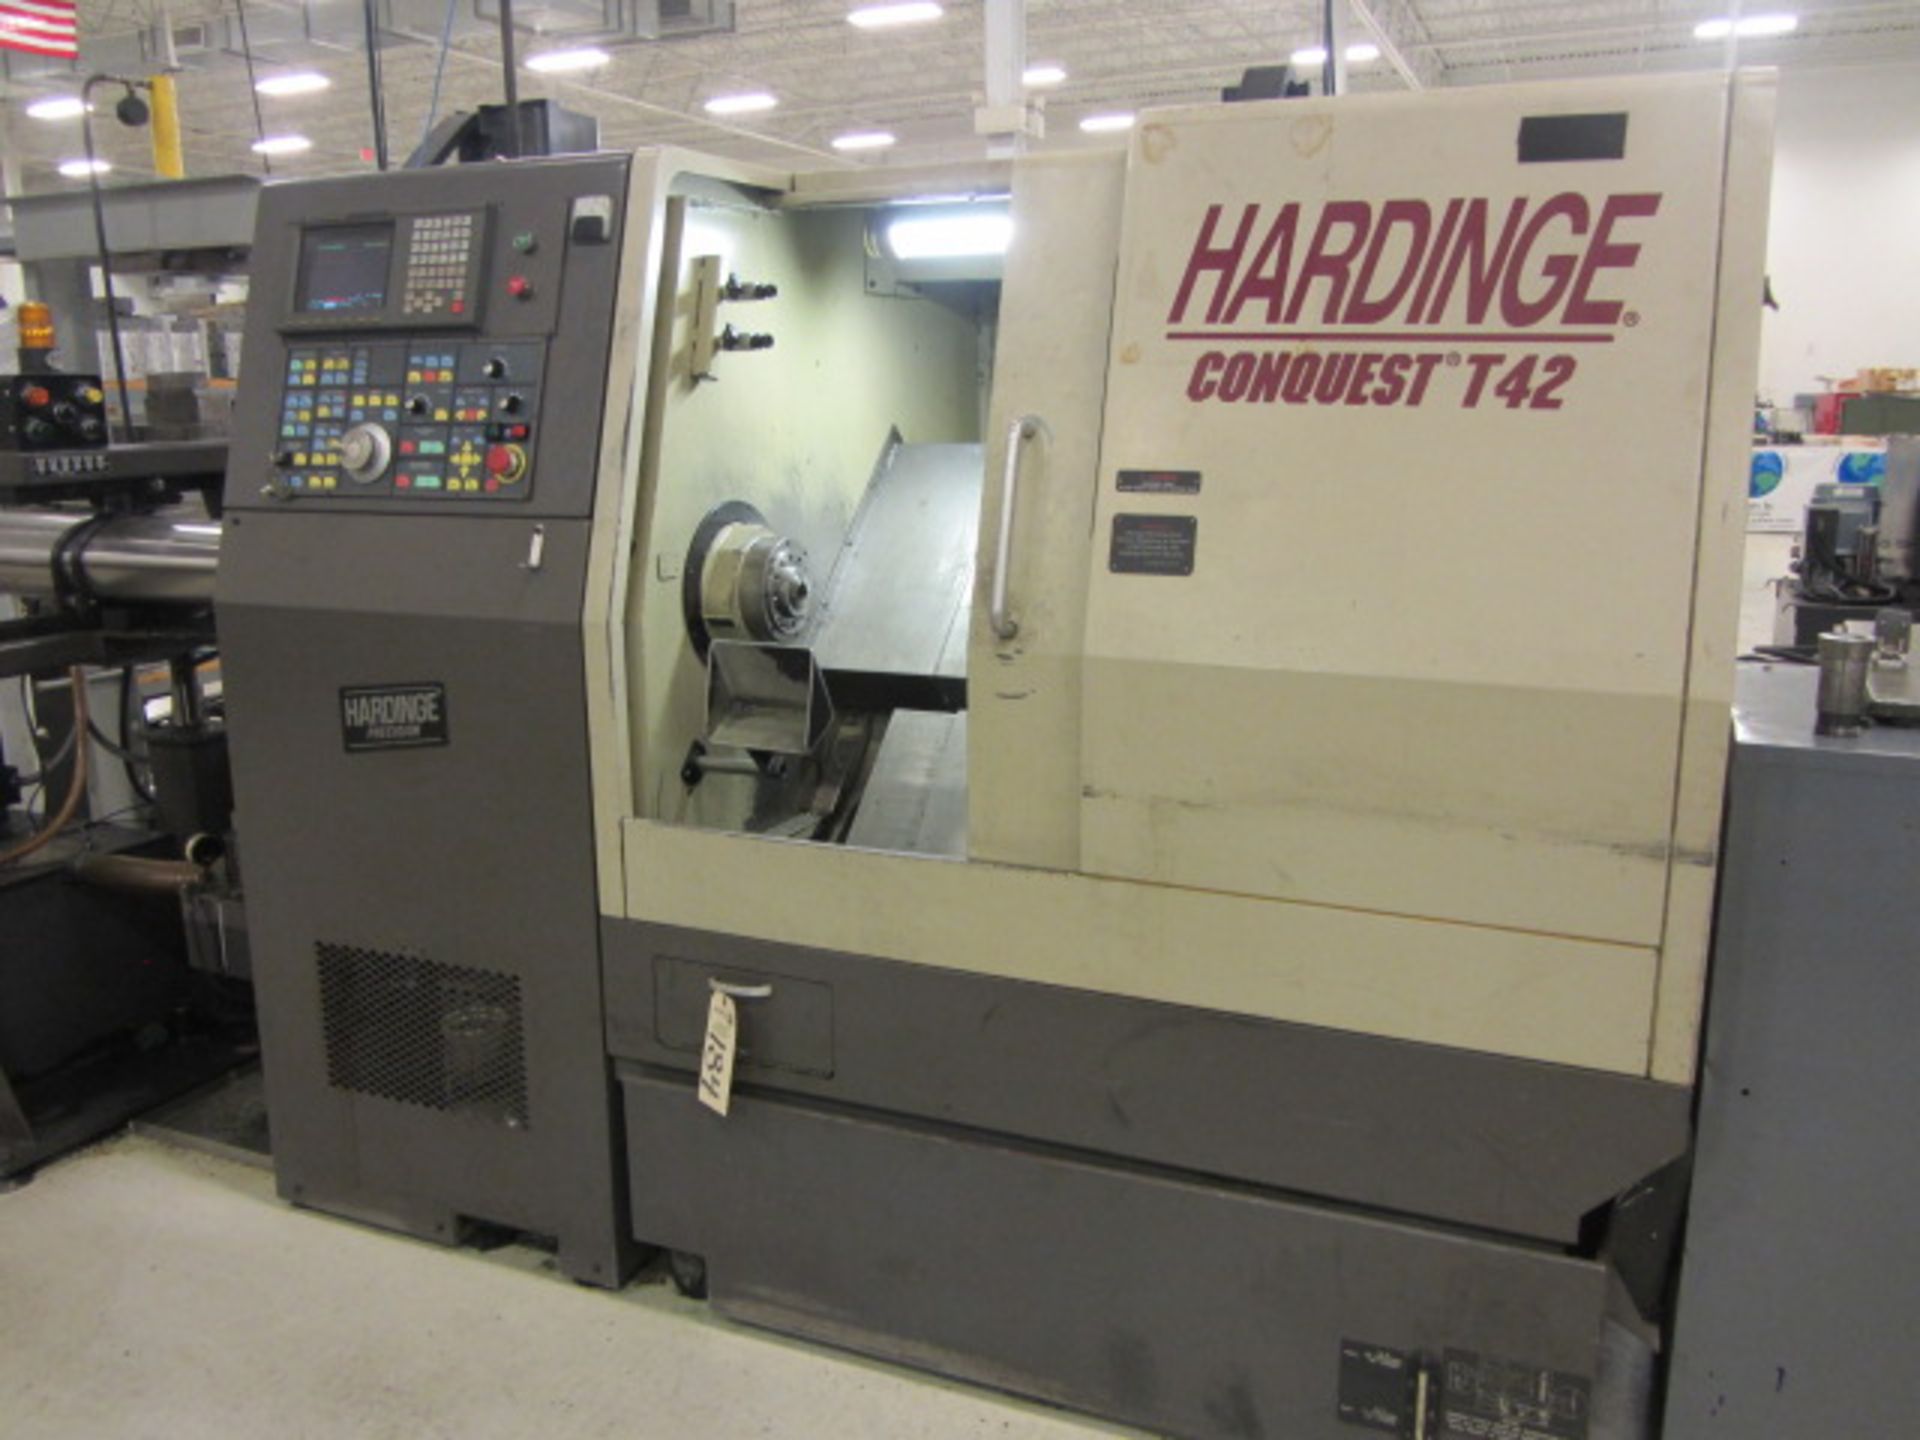 Hardinge Conquest T42 CNC Turning Center with 6'' Chuck, Collet Spindle Nose, Spindle Speeds to 5000 - Image 7 of 9